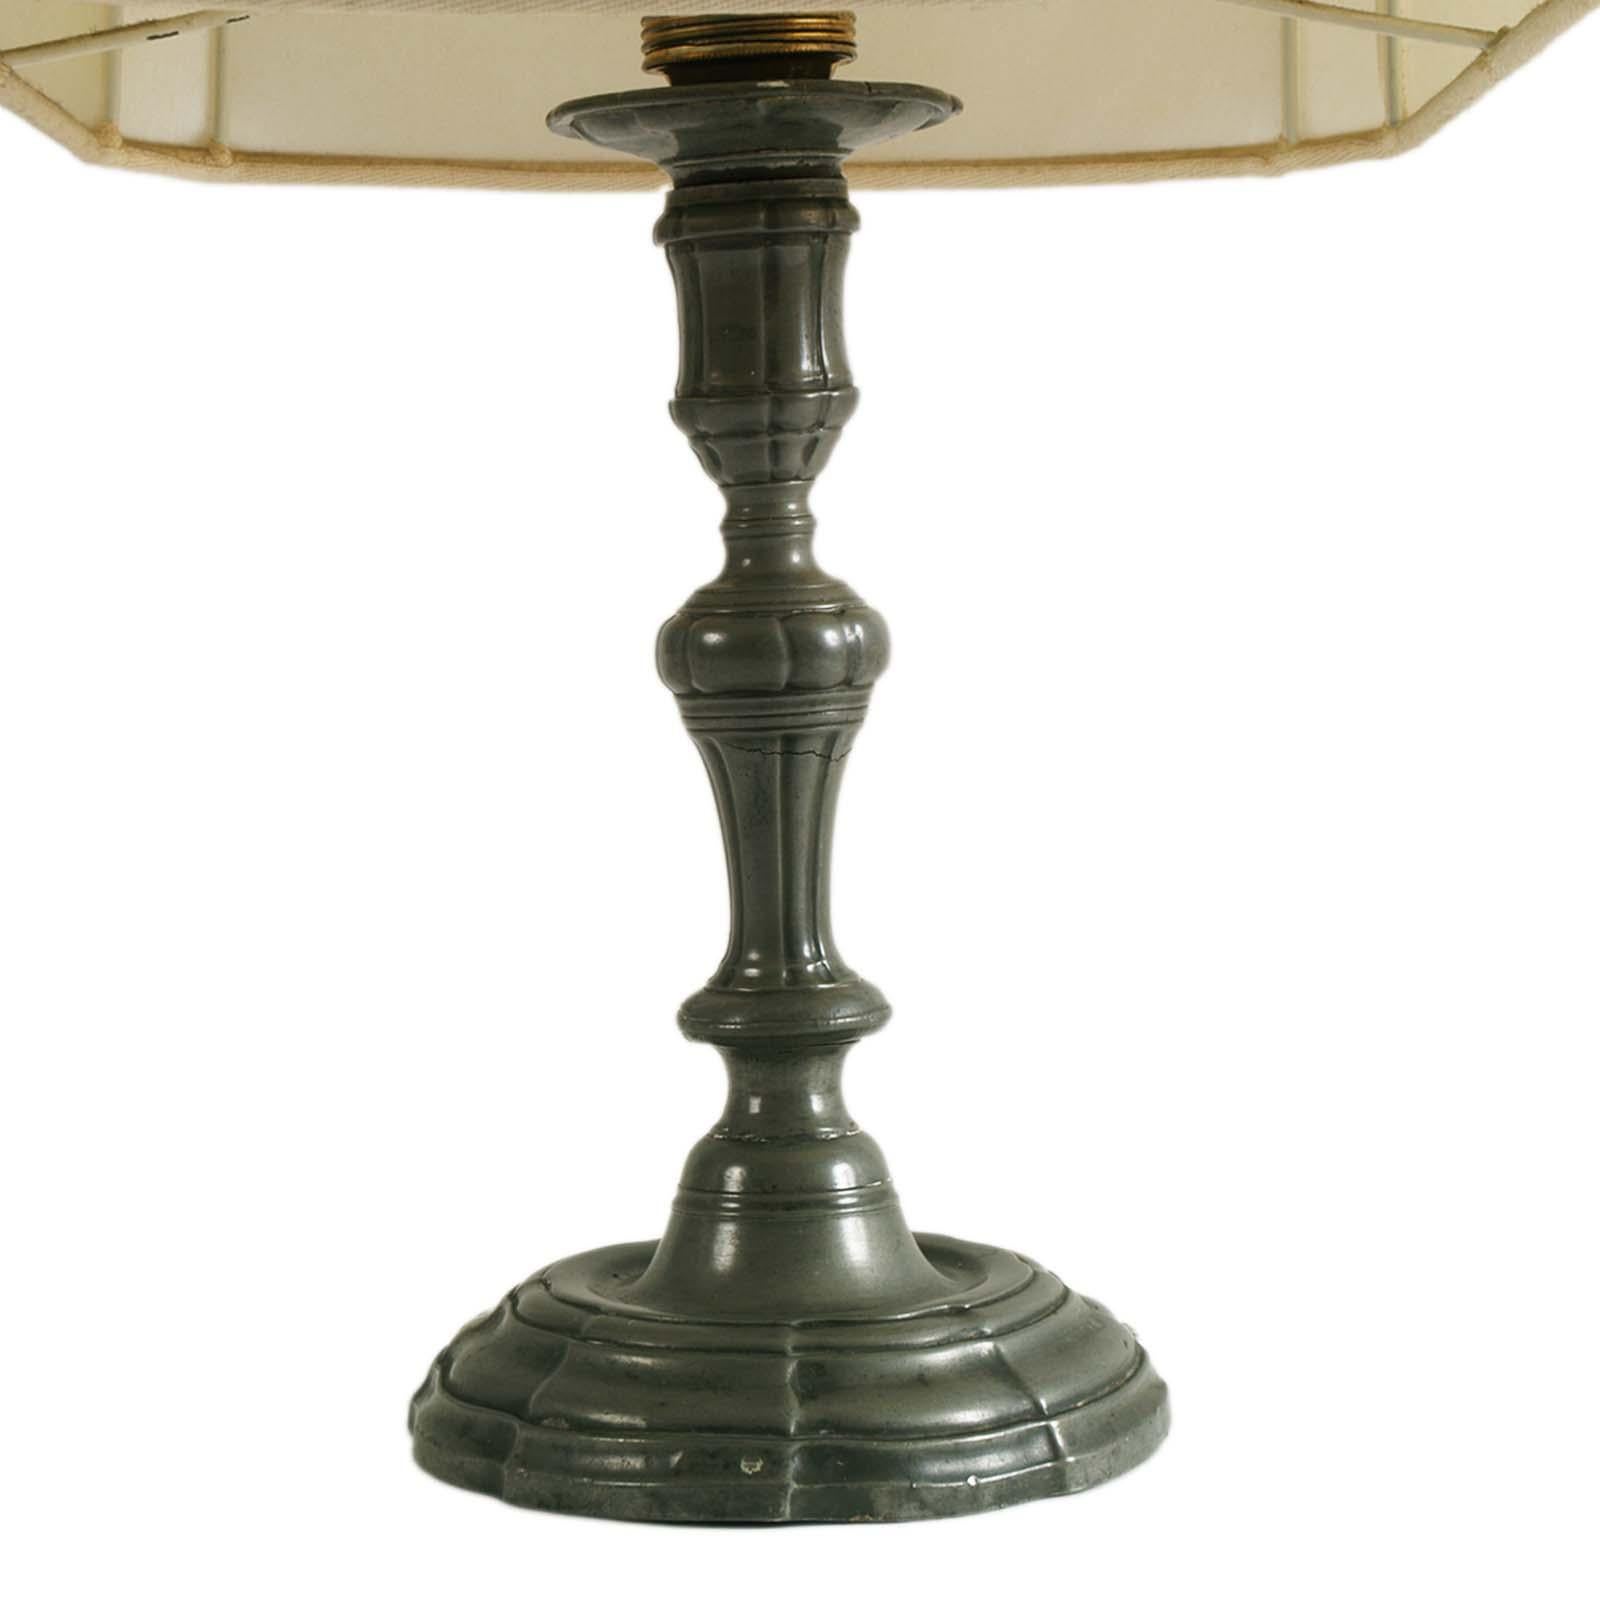 Antique 1930s table lamp in patinated Pewter, Baroque style, Fonderia d'Arte Adriano Vallin, attributed.
Height patinated pewter cm. 30.